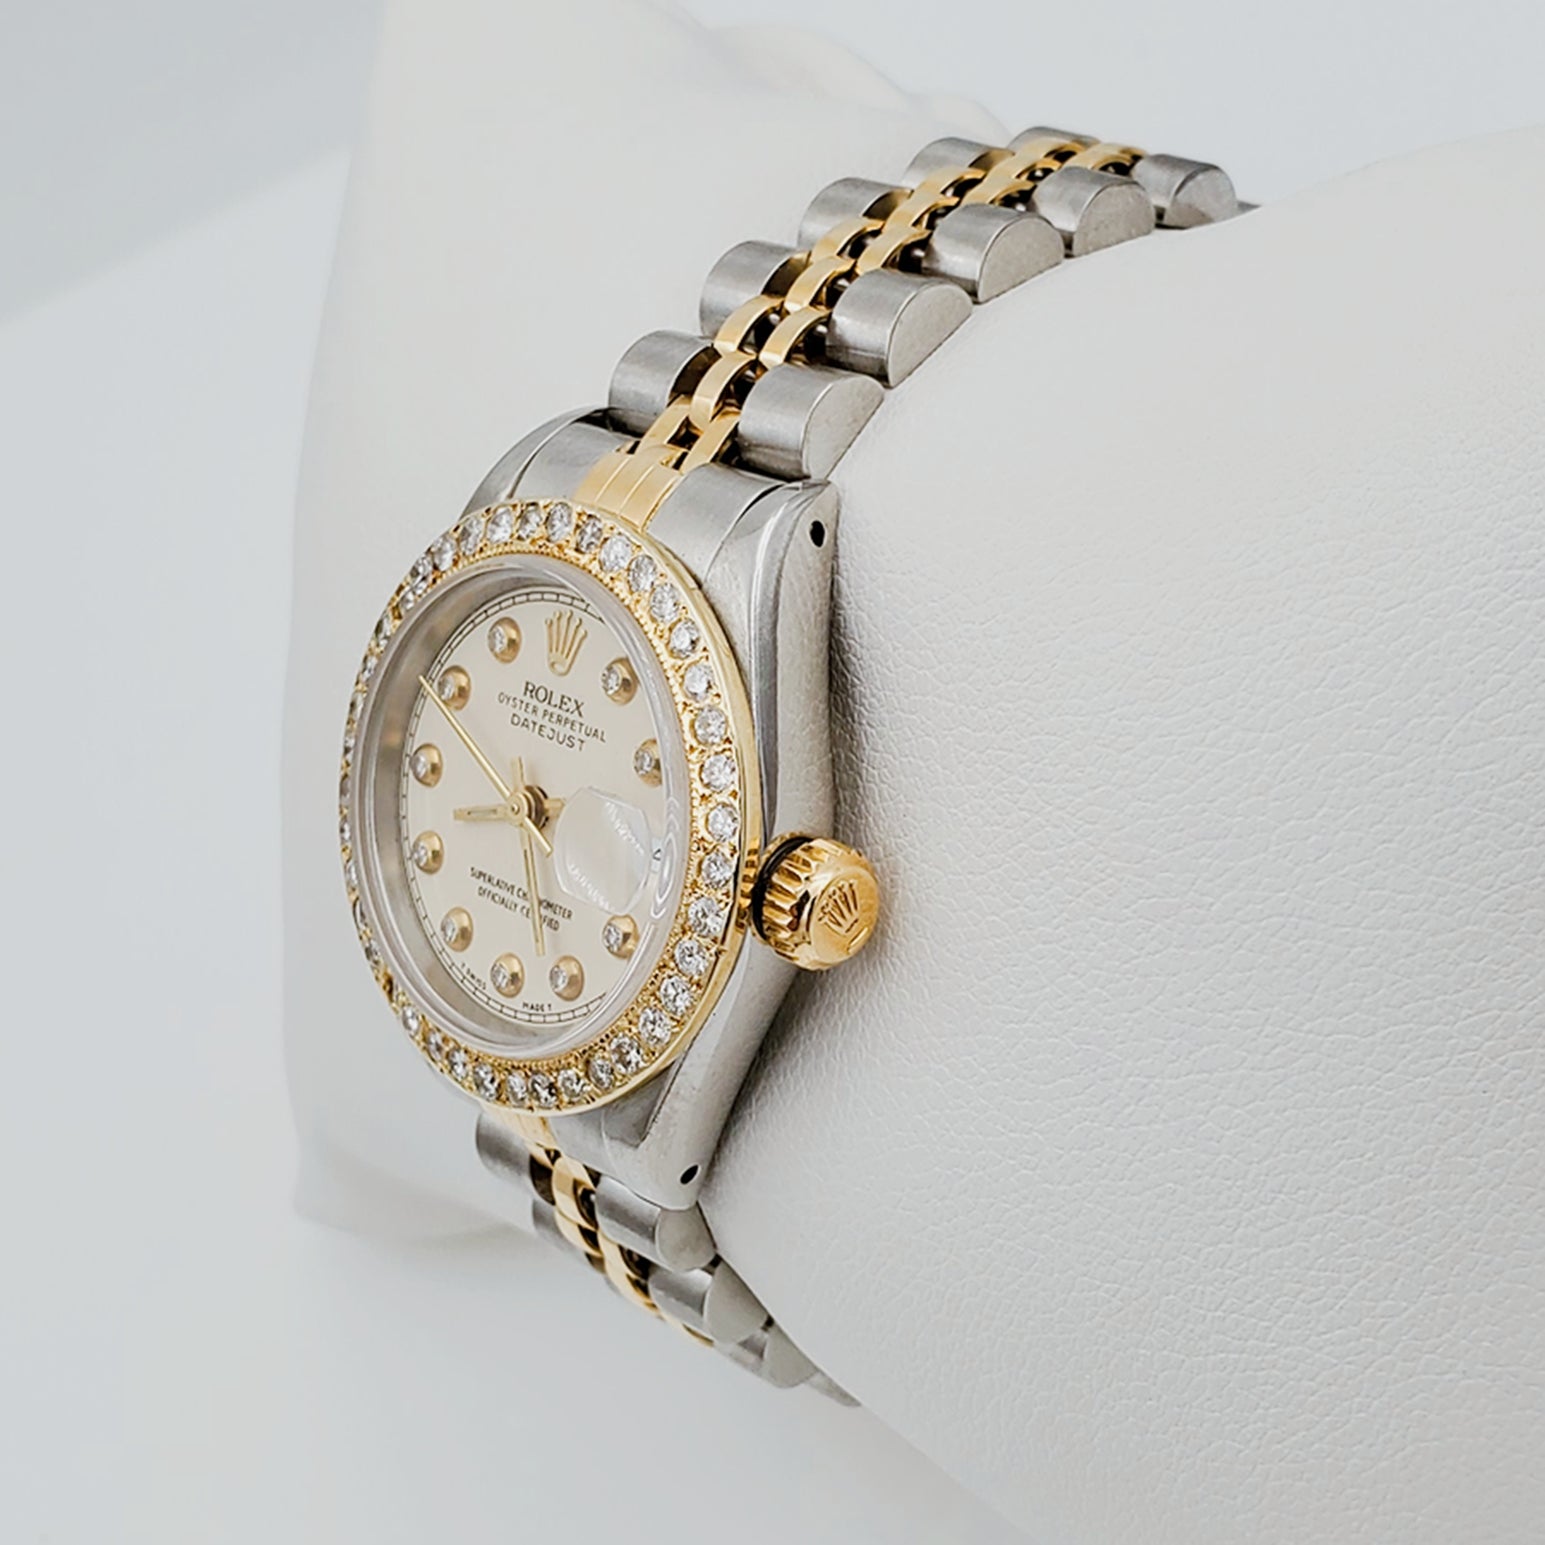 Women's Rolex 26mm DateJust 18K Gold / Two-Tone Stainless Steel Watch with Beige Diamond Dial and Diamond Bezel. (Pre-Owned)